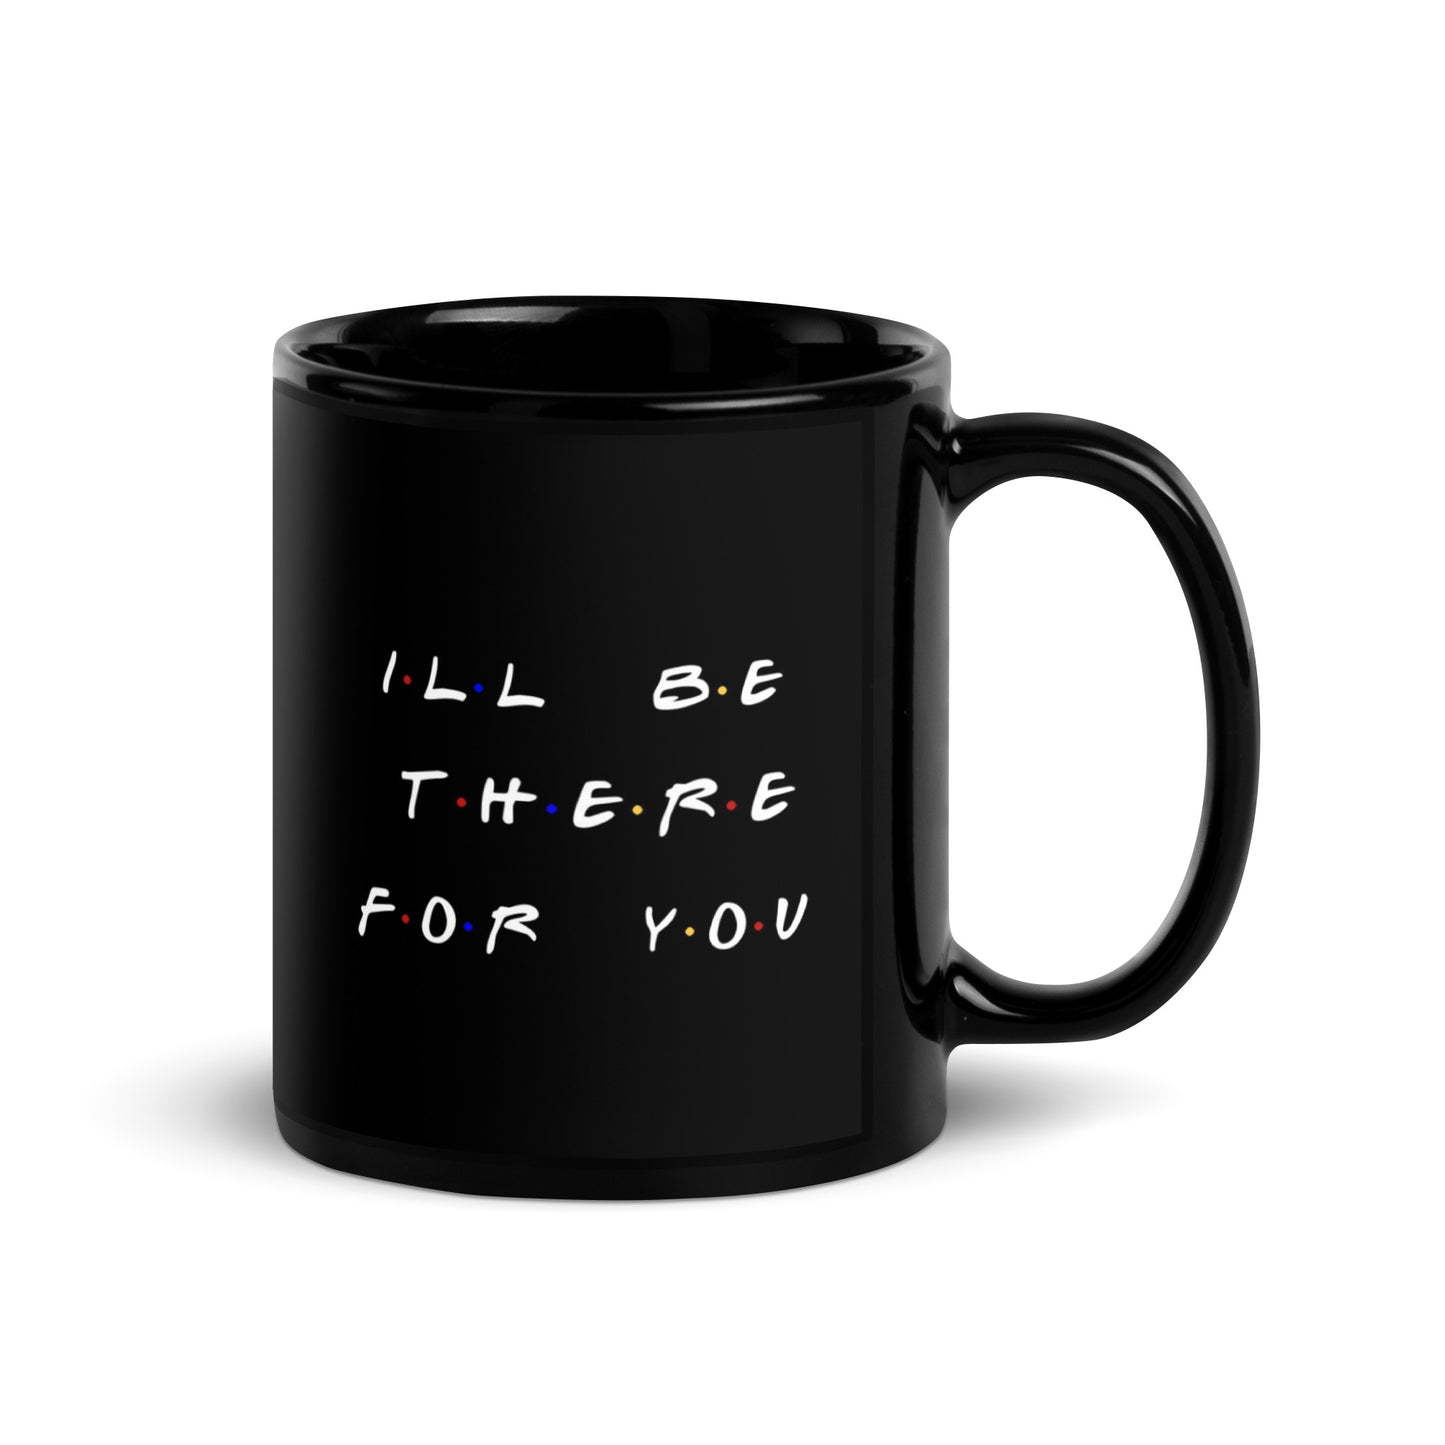 Chandler Bing "I'll Be There for You" Mug - Friends TV Show Fan Gift